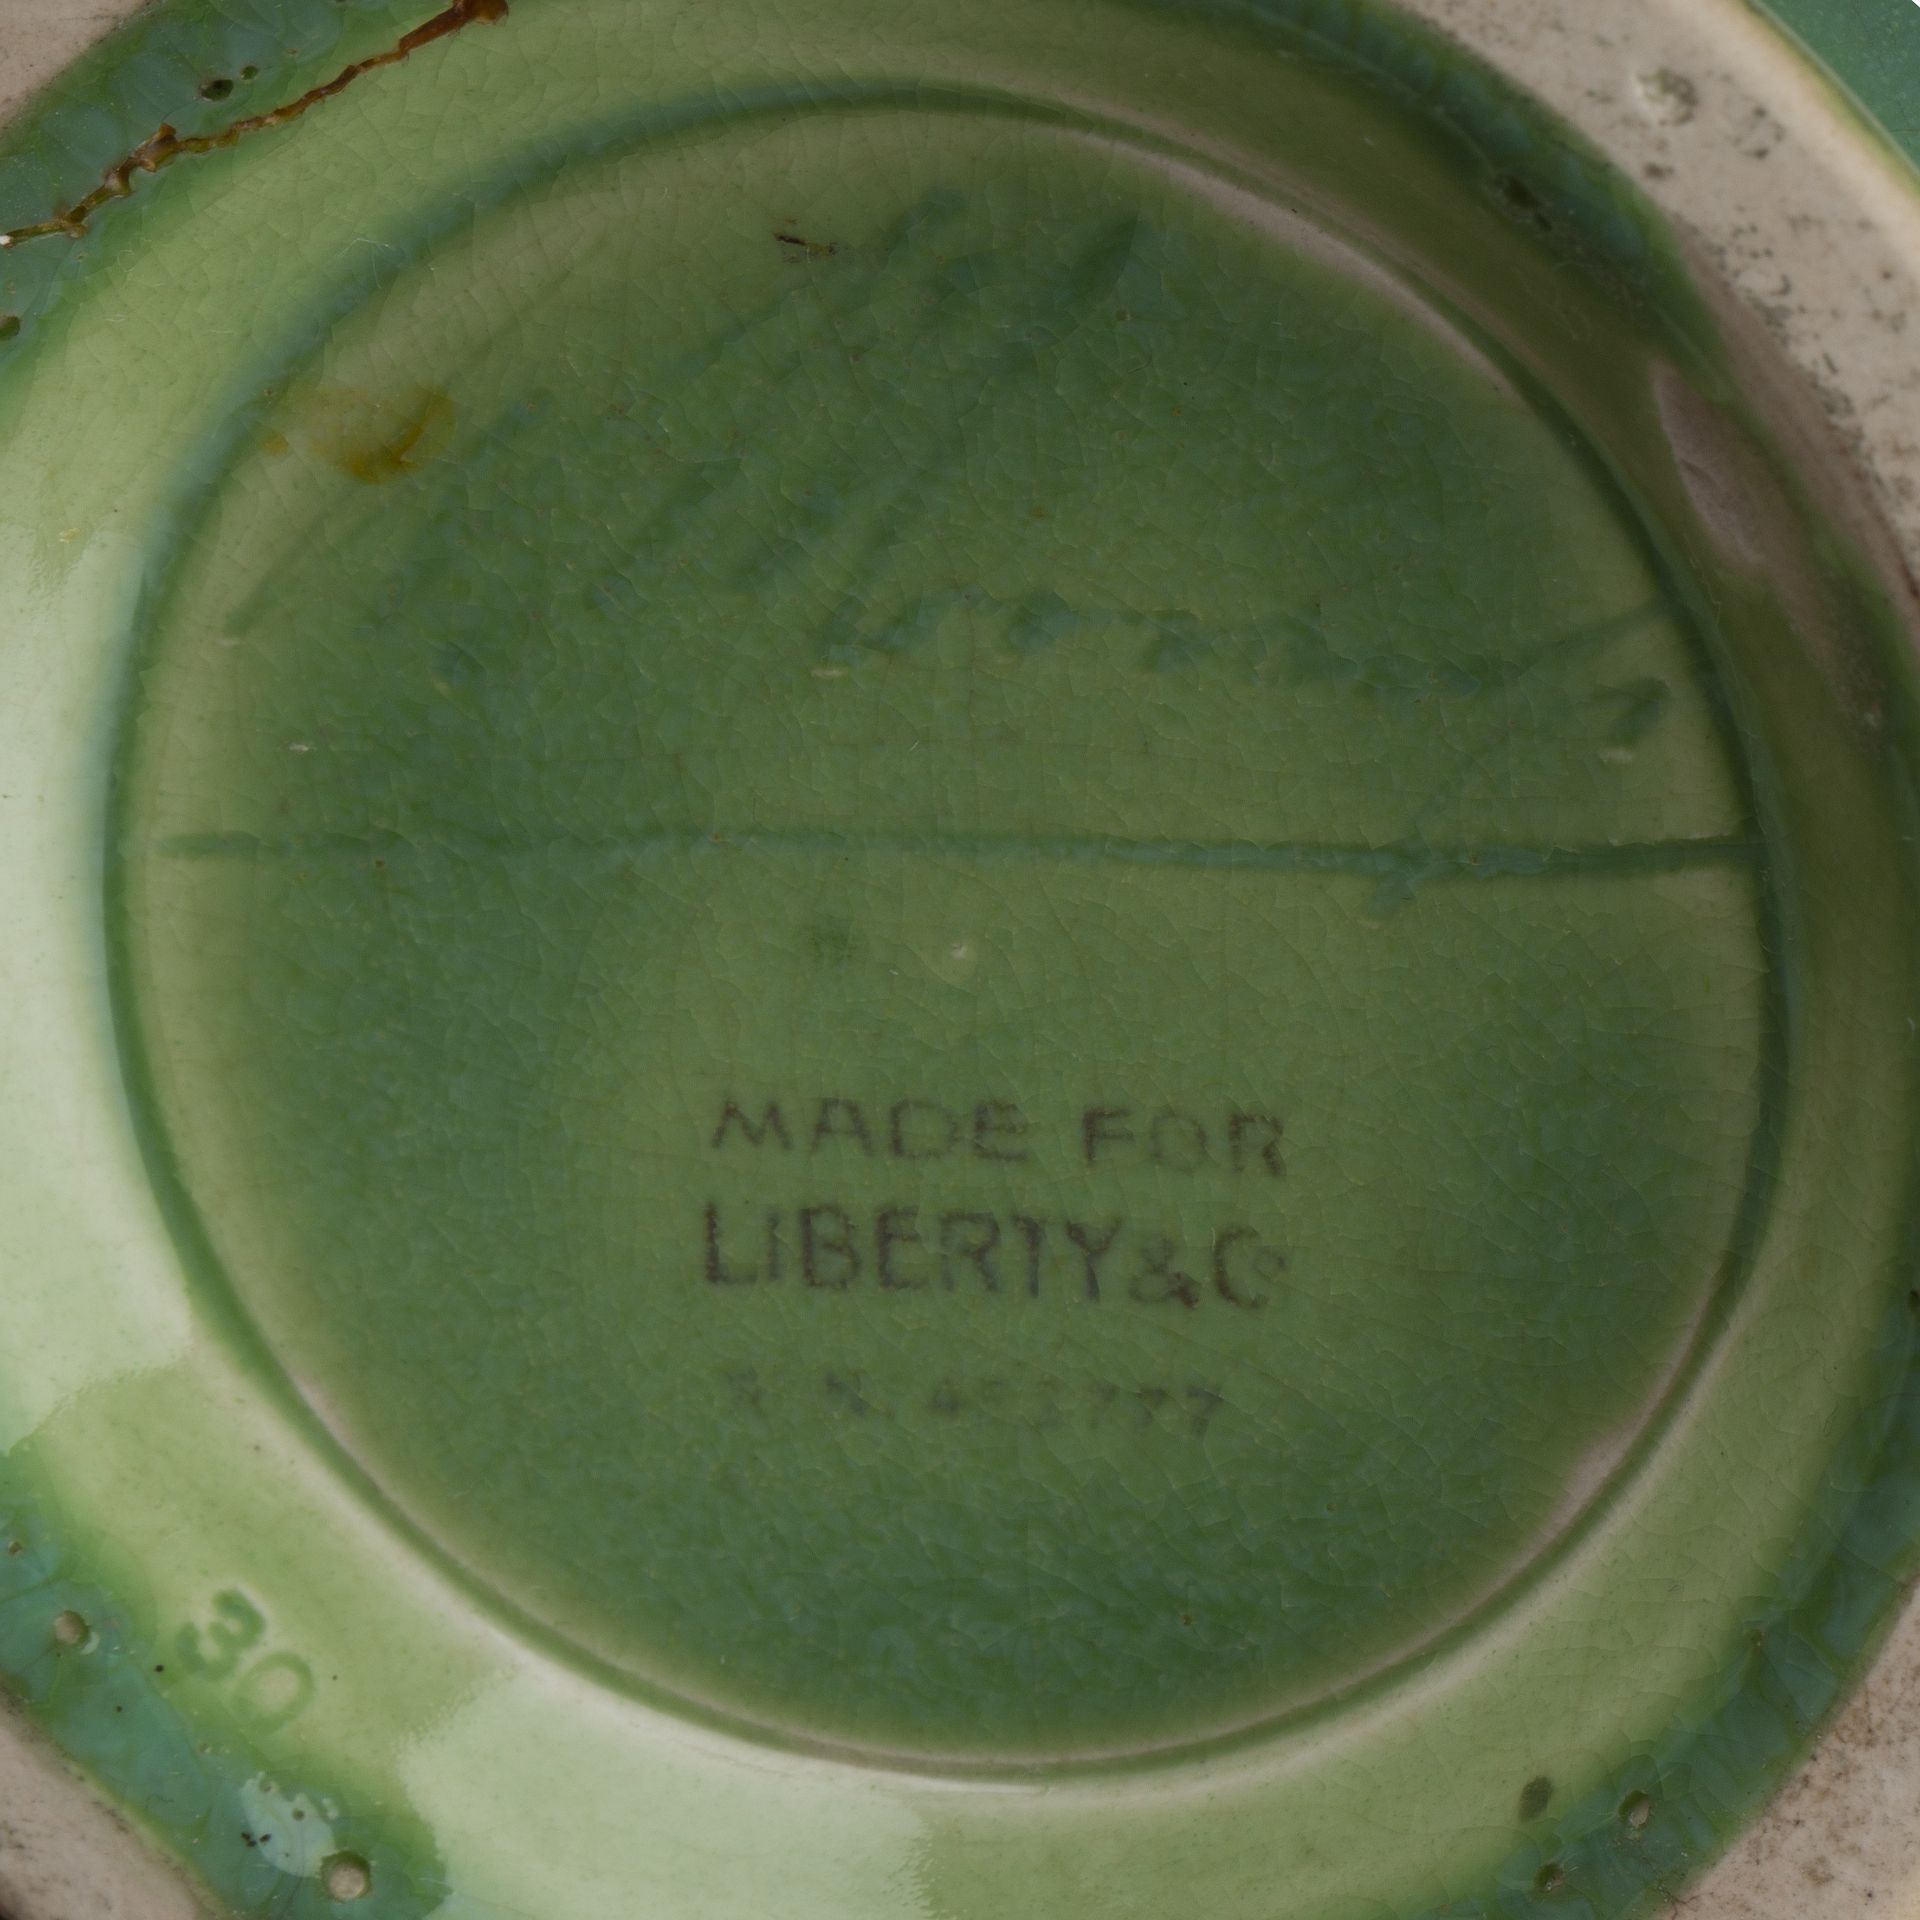 William Moorcroft (1872-1945) for Liberty and Co 'Flamminian ware' in green colourway, with - Bild 4 aus 6